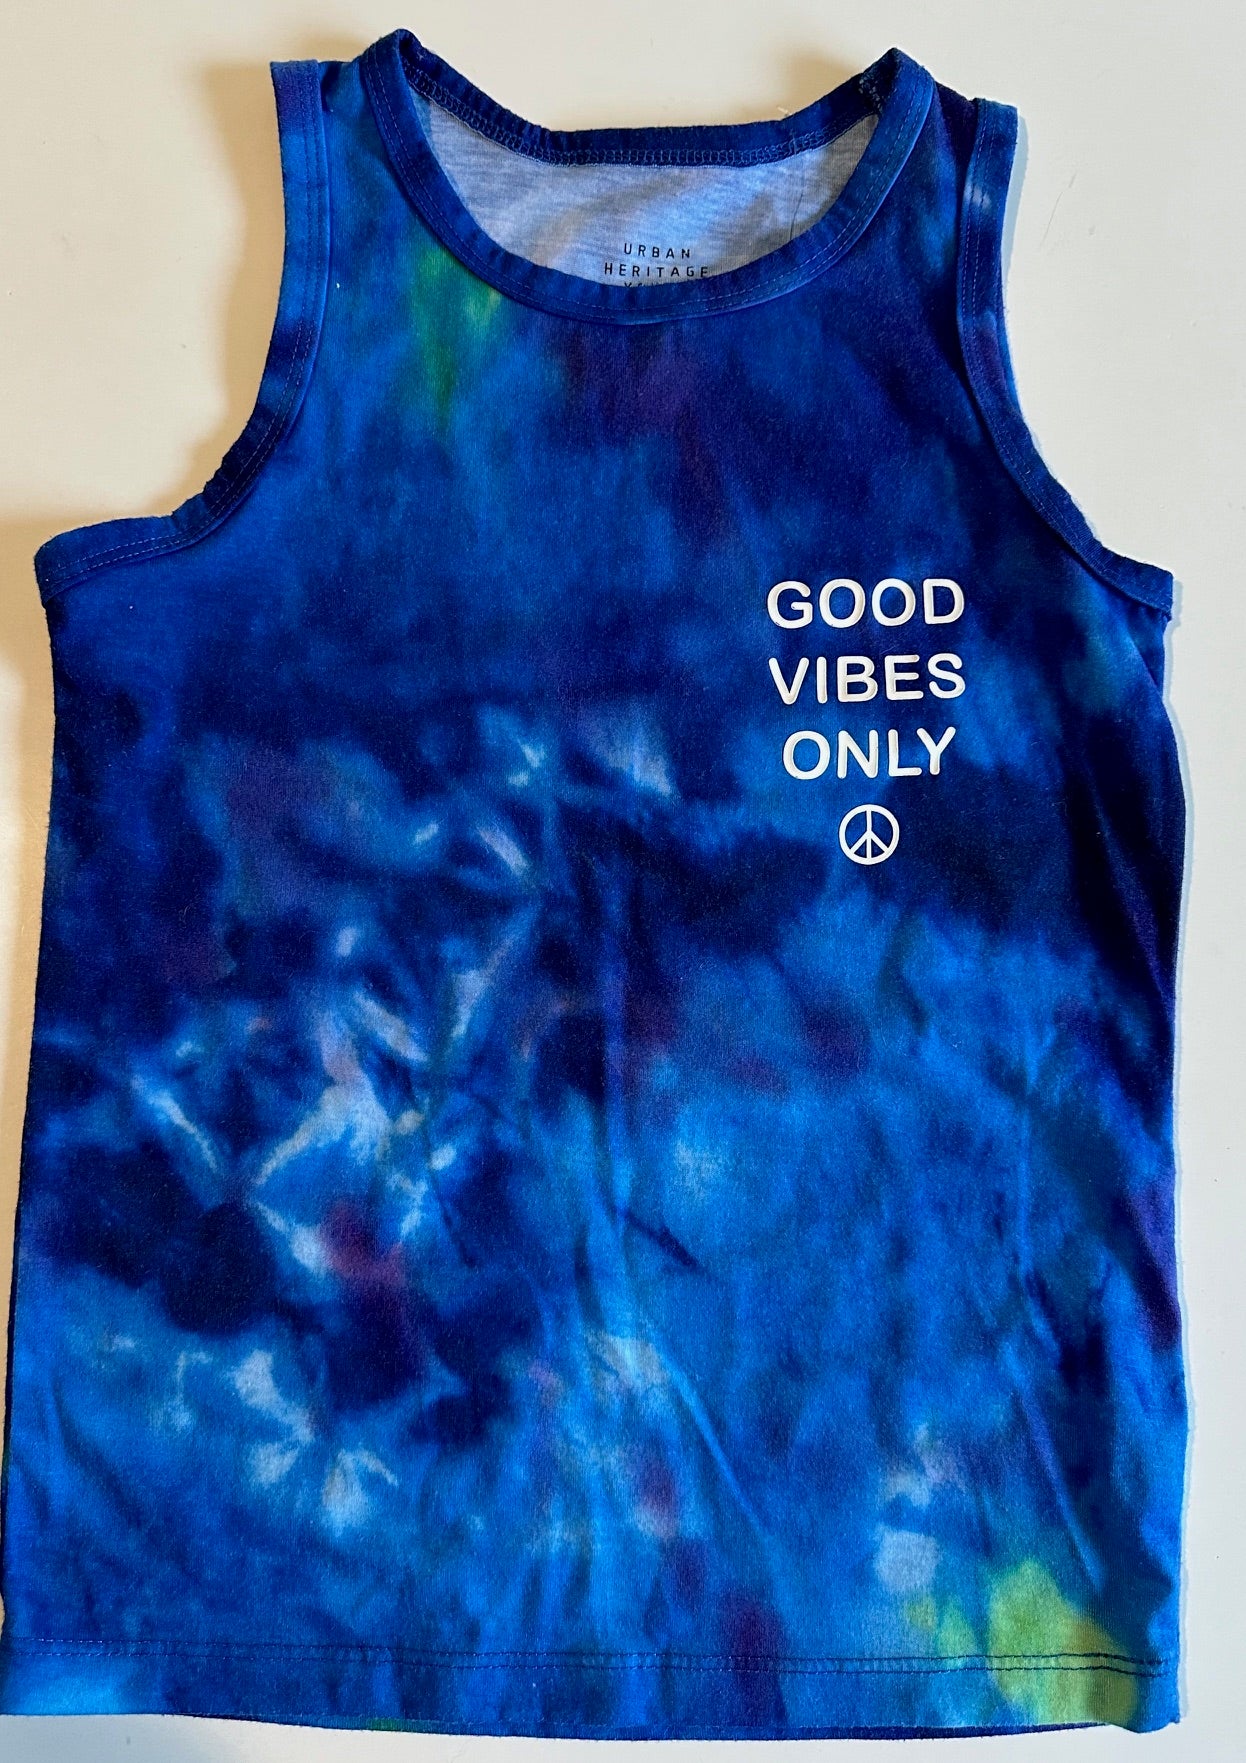 Urban Heritage Youth, Blue "Good Vibes Only" Muscle Shirt - Size XS (6)